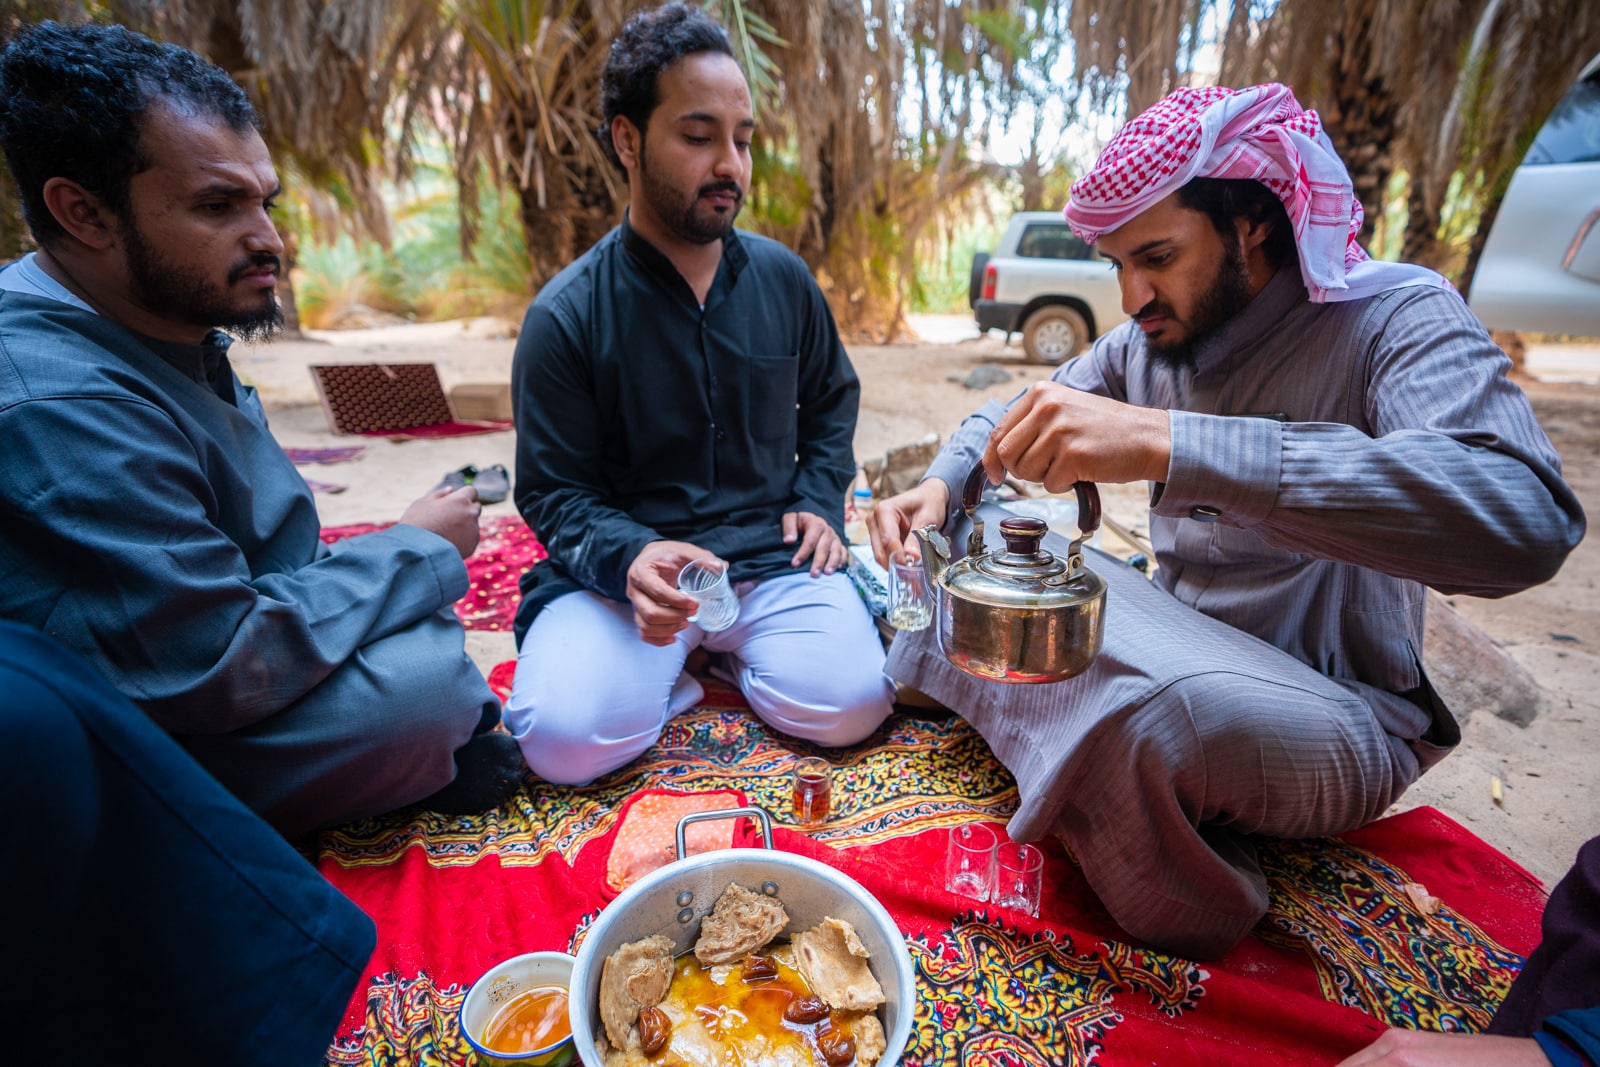 Saudi men eating on the ground while camping.